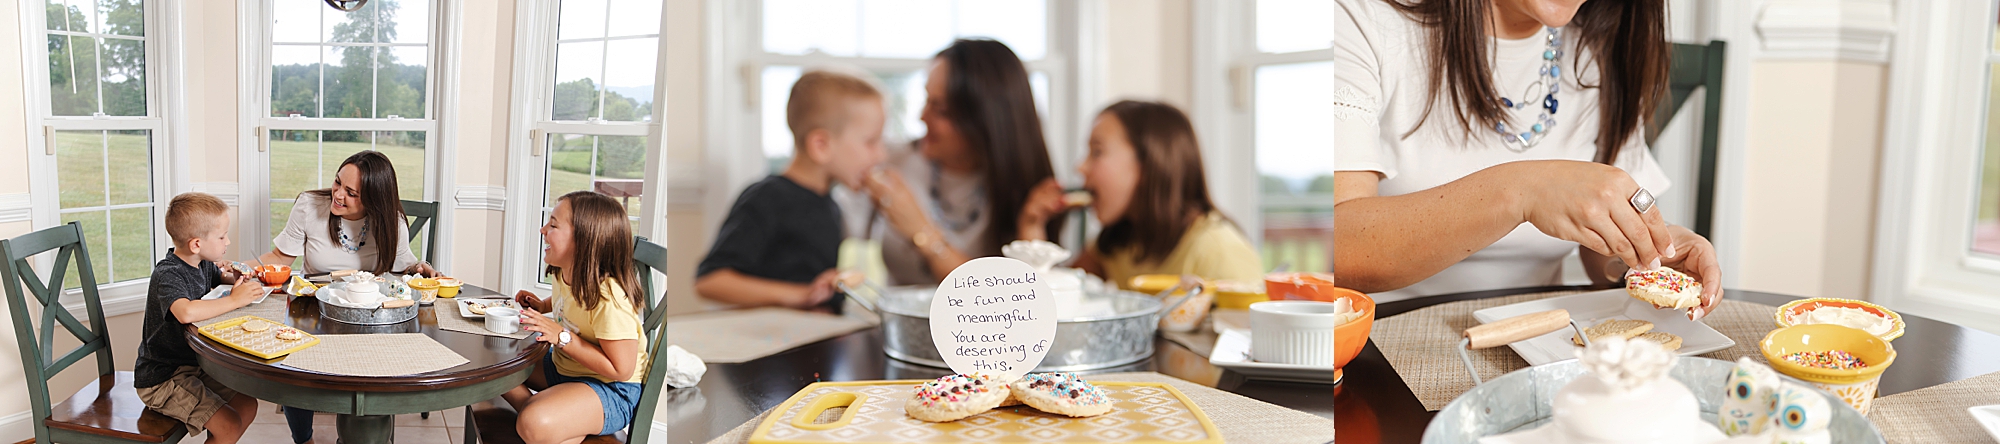 personal_branding_photographer_kristina_rose_photography family making cookies